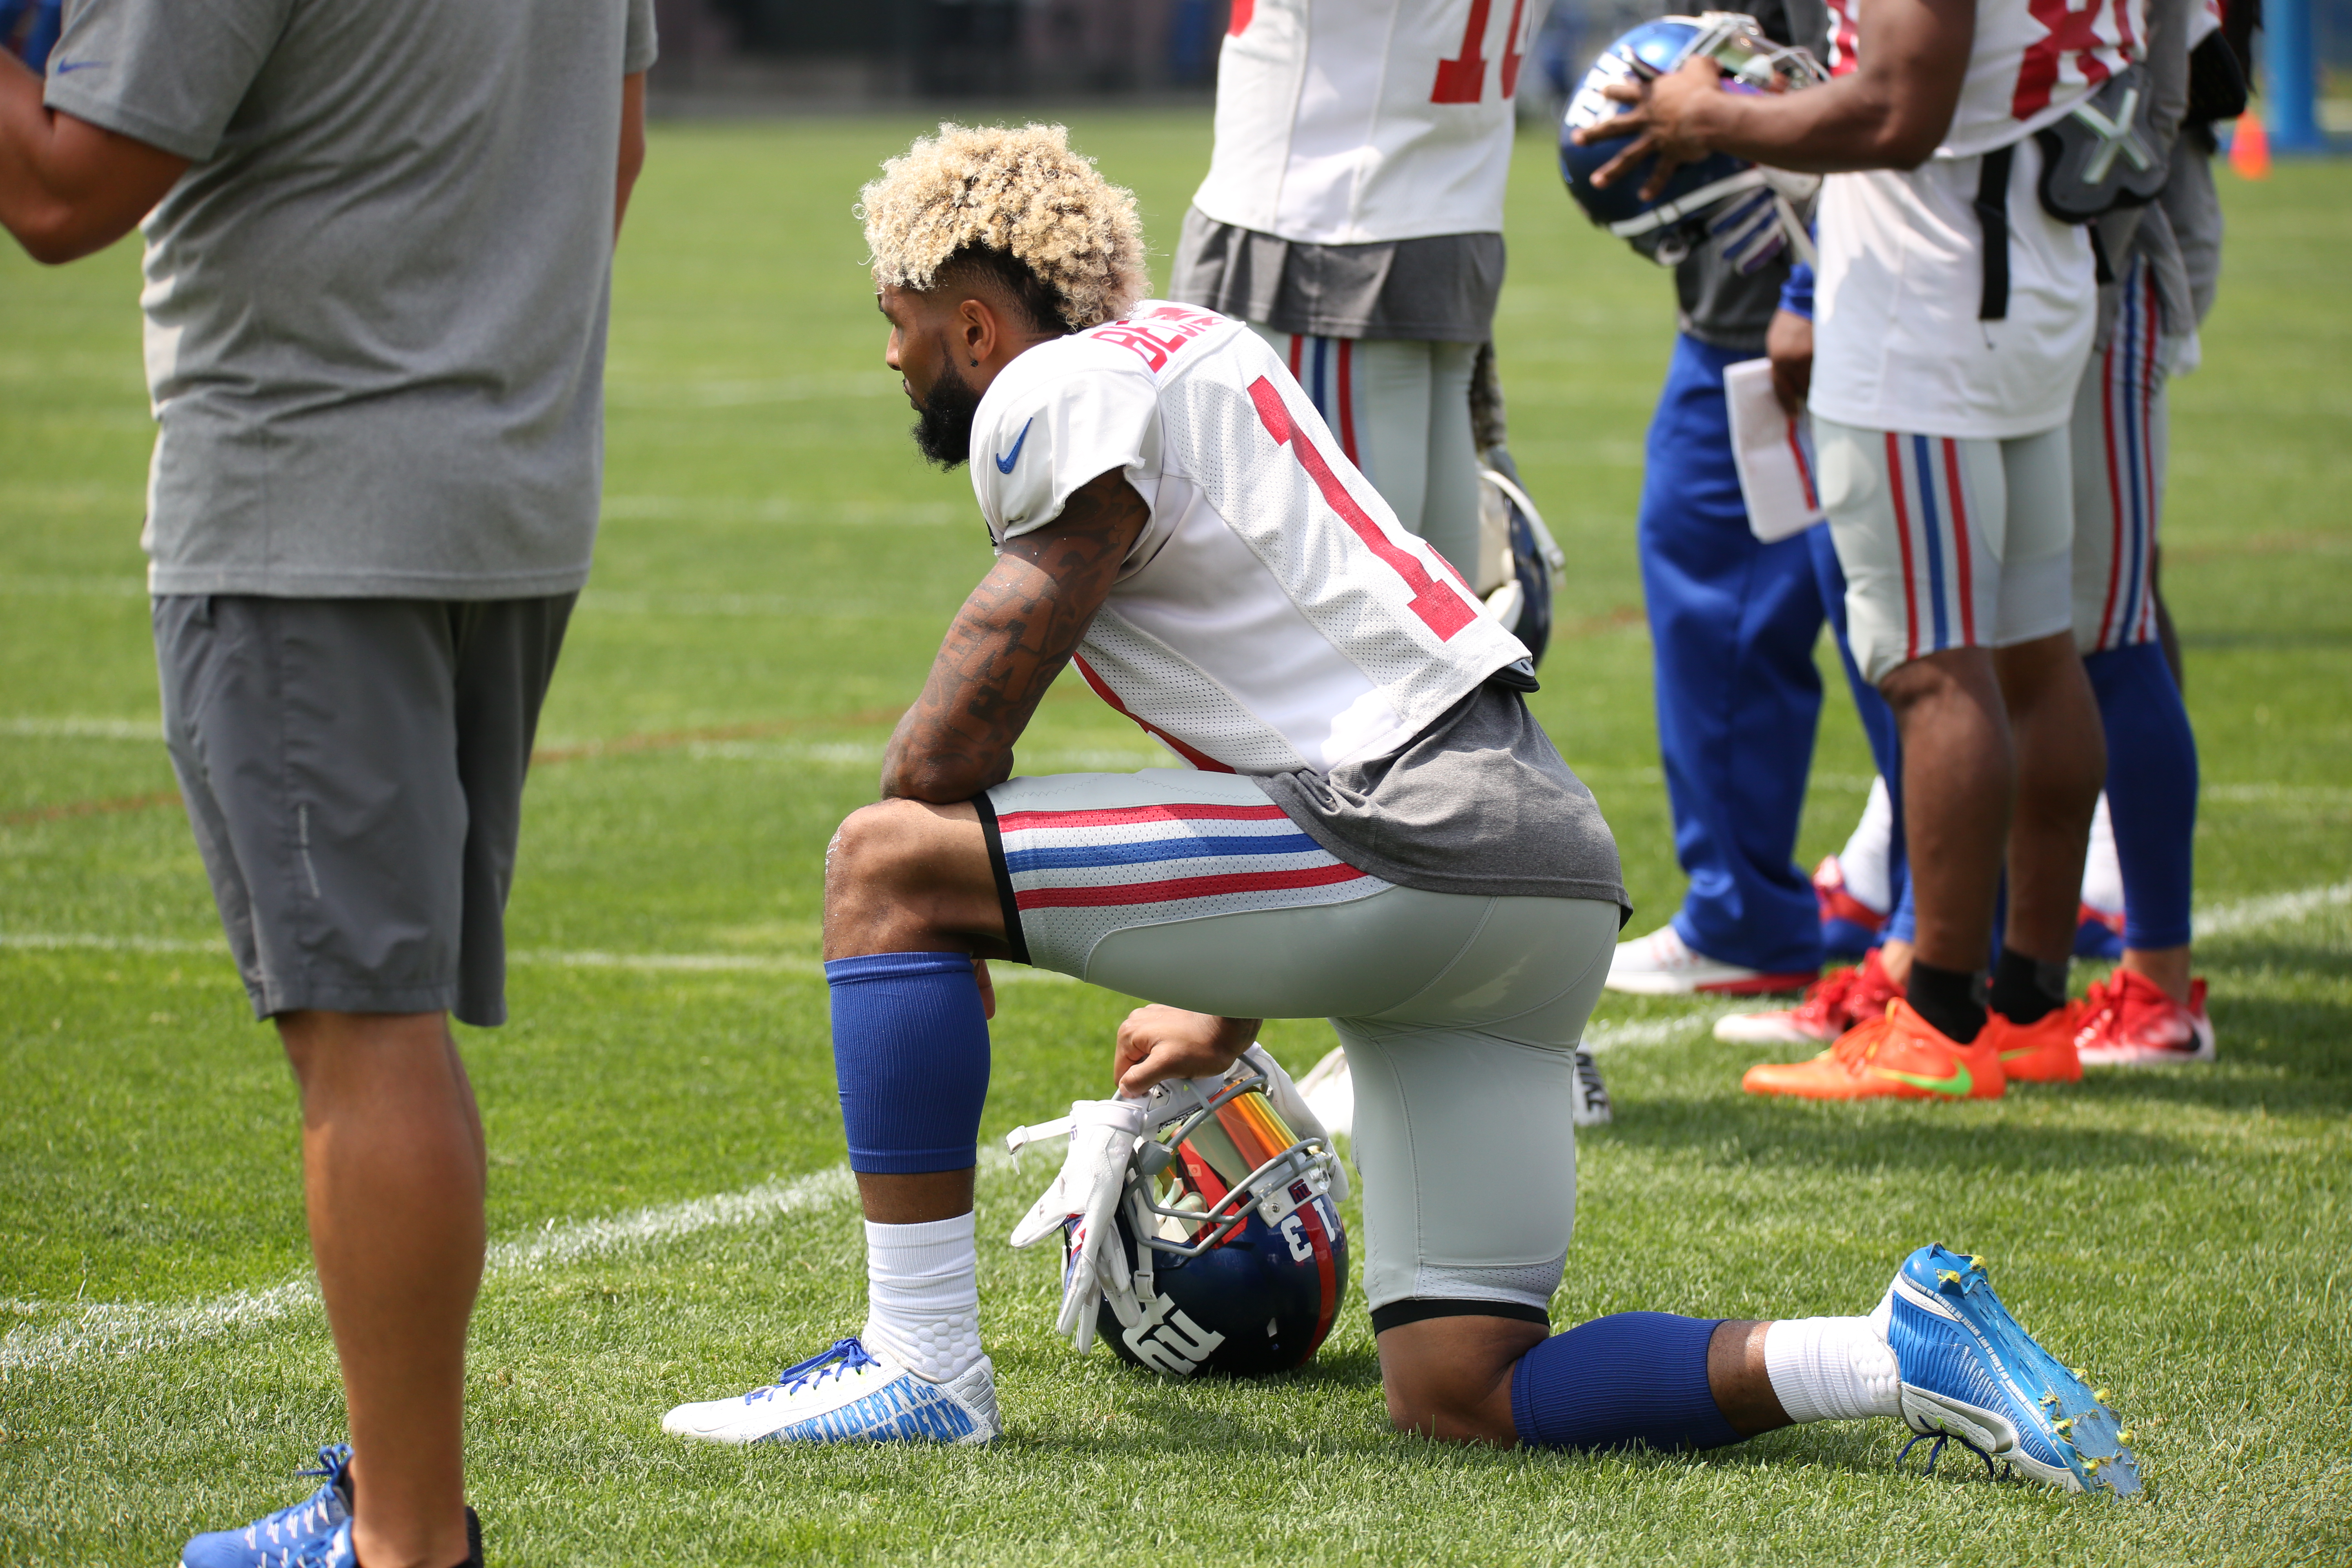 #13 Odell Beckham Jr. looks on from the side during training camp Saturday (photo: Bobby O'Hara)